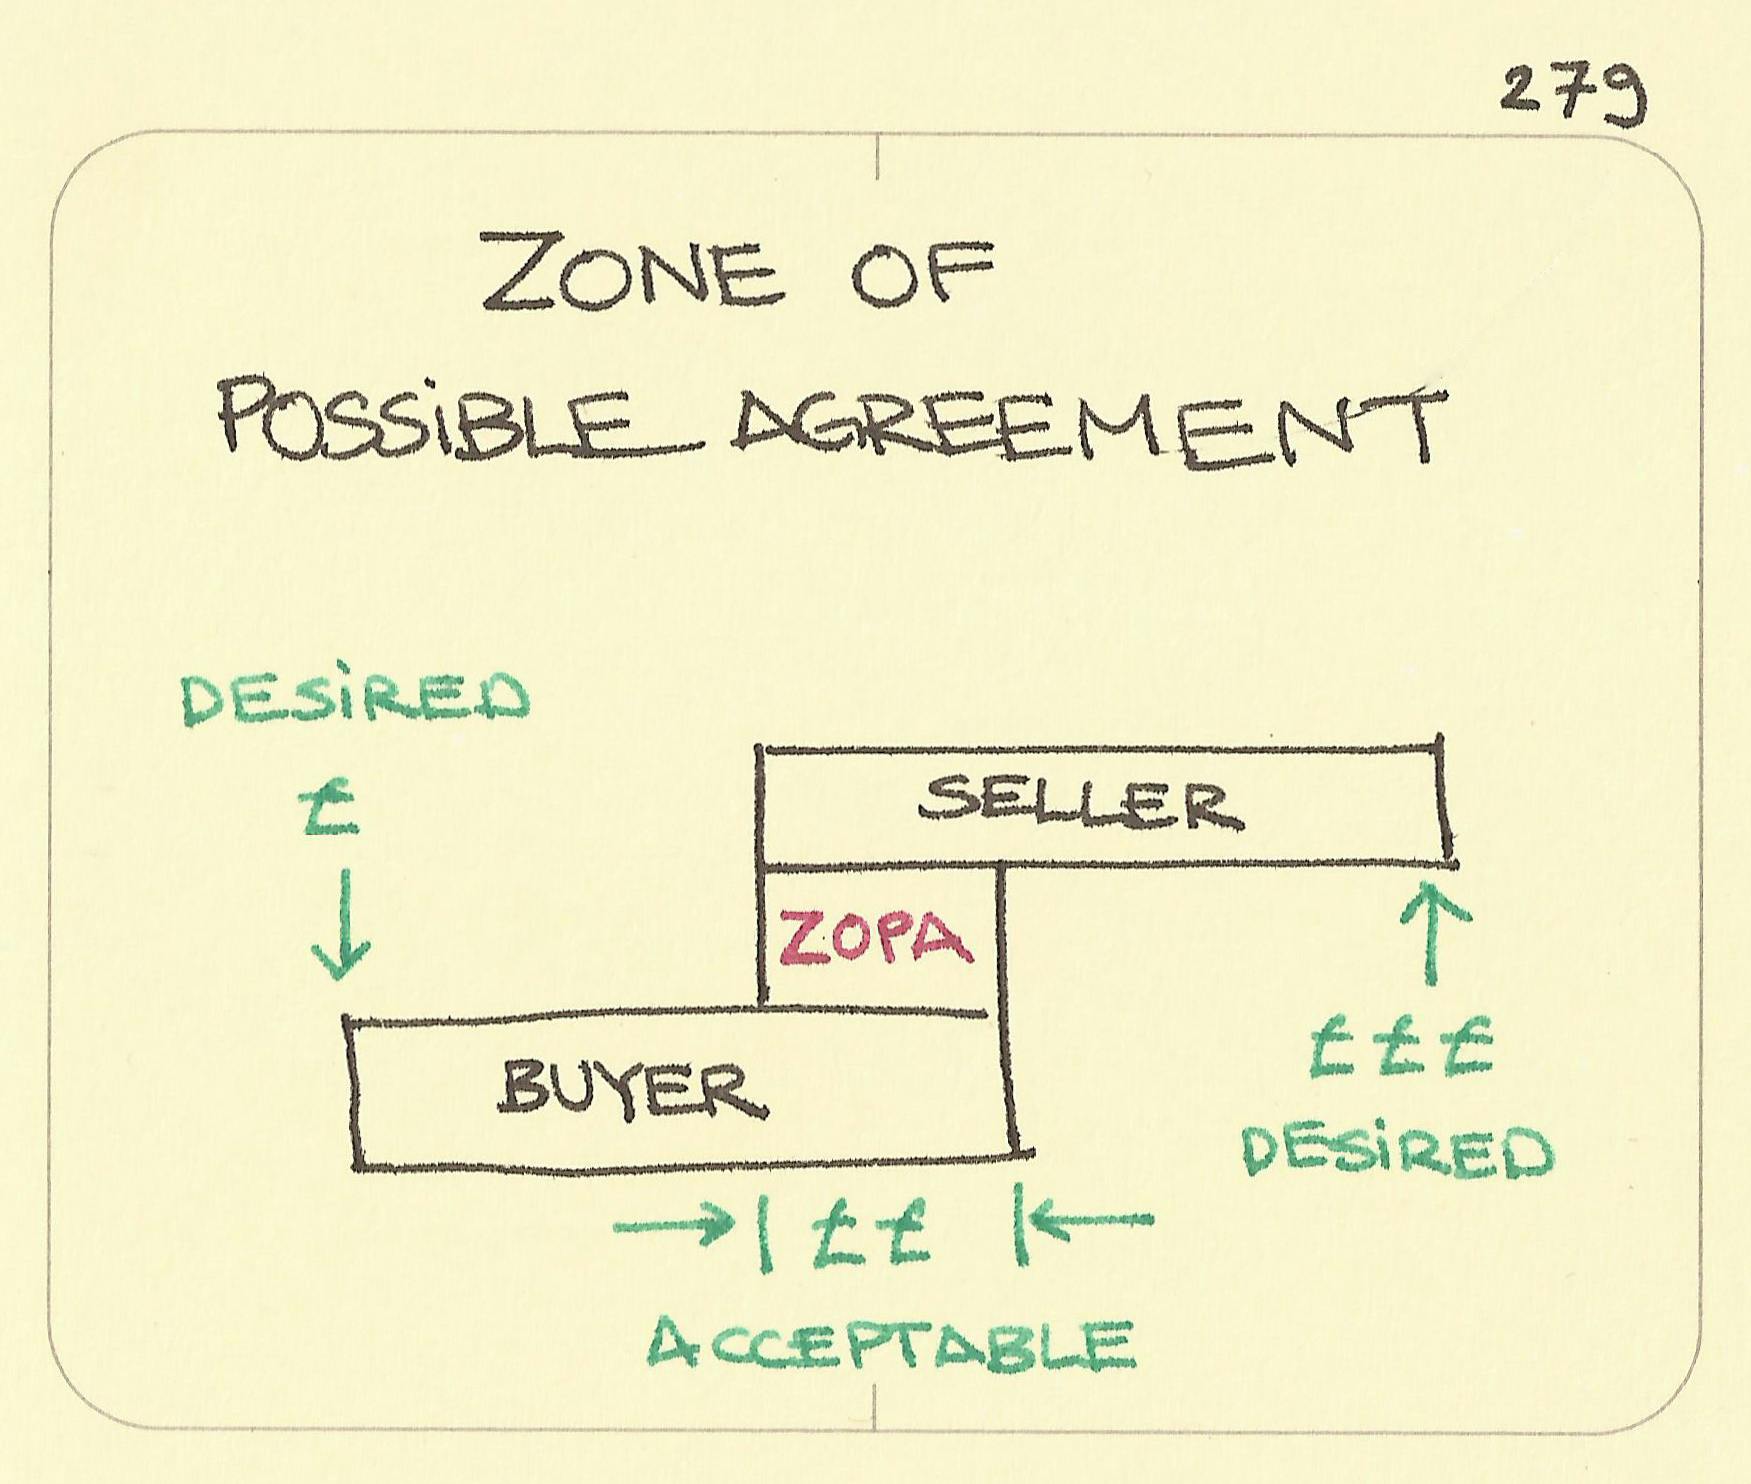 Zone of Possible Agreement - Sketchplanations